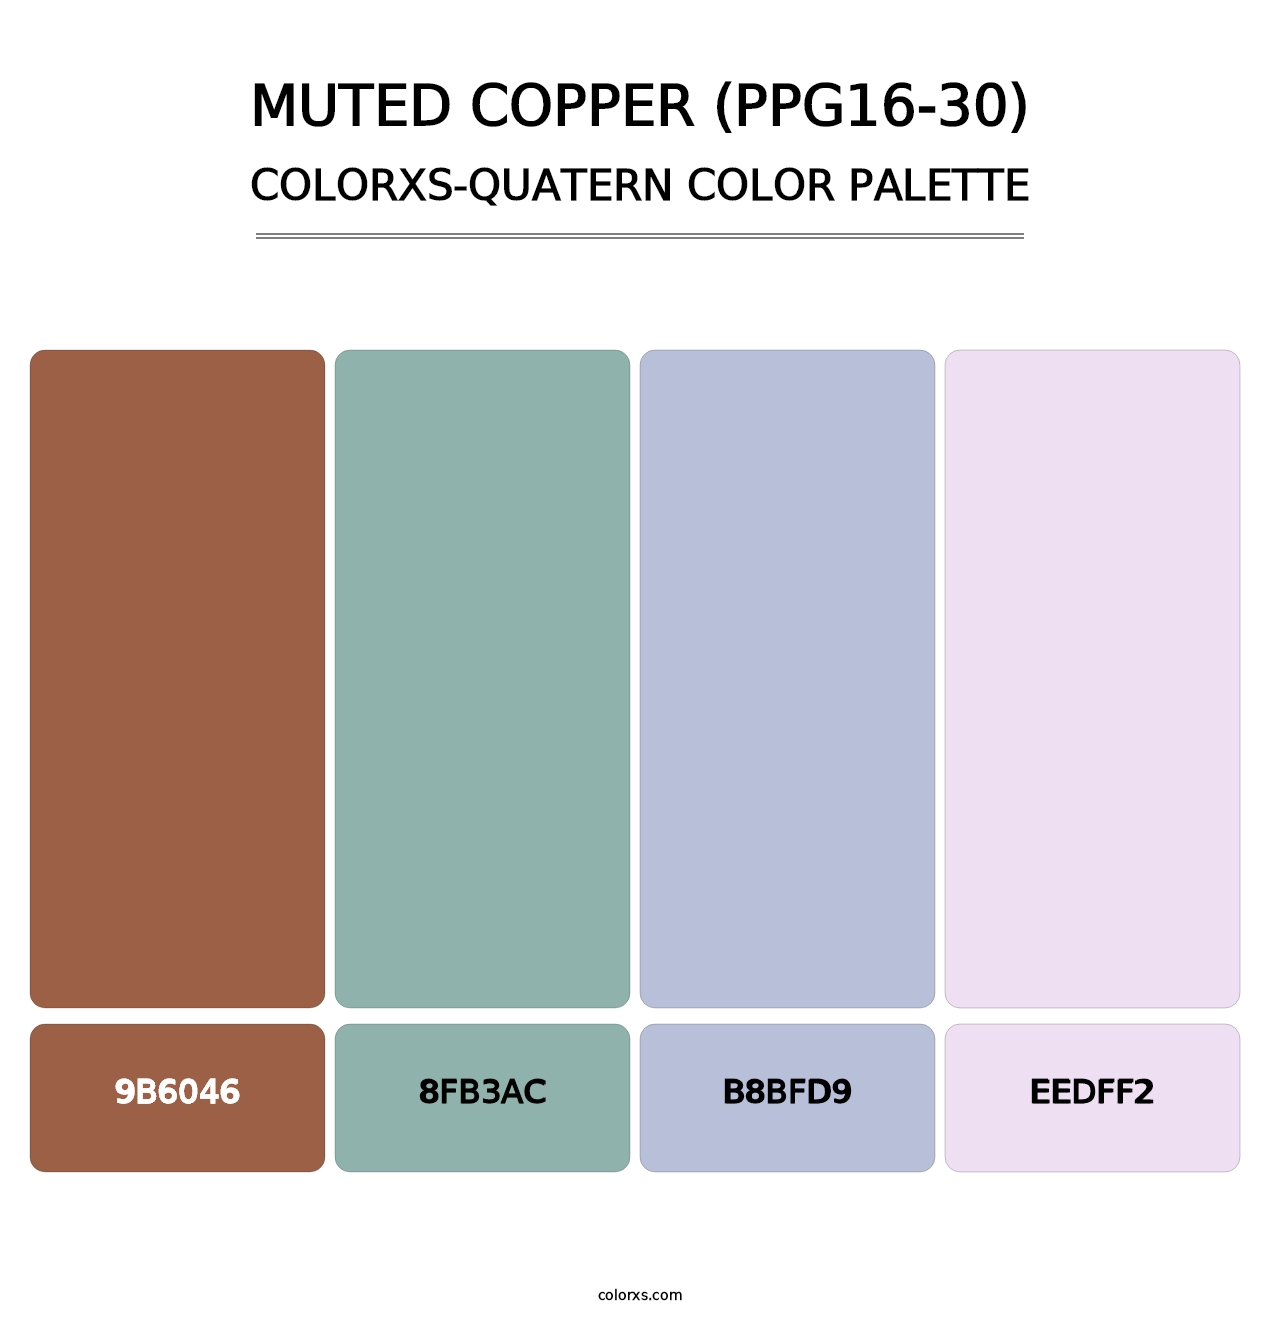 Muted Copper (PPG16-30) - Colorxs Quatern Palette